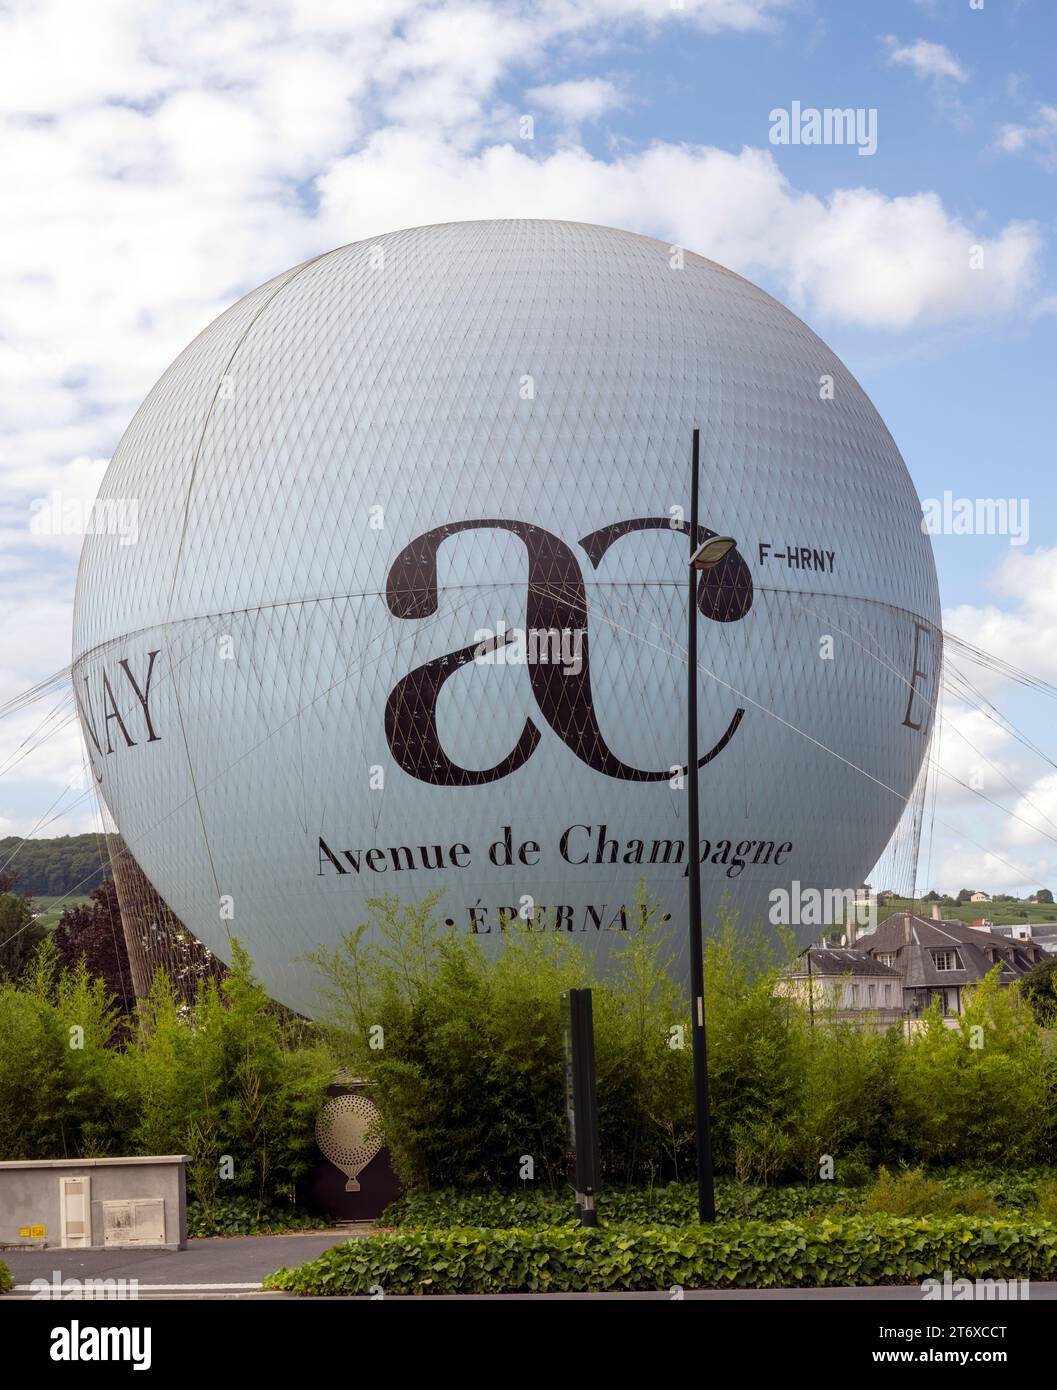 Hot Air Balloon in Avenue de Champagne, Epernay, Marne, France - a tourist attraction. Stock Photo